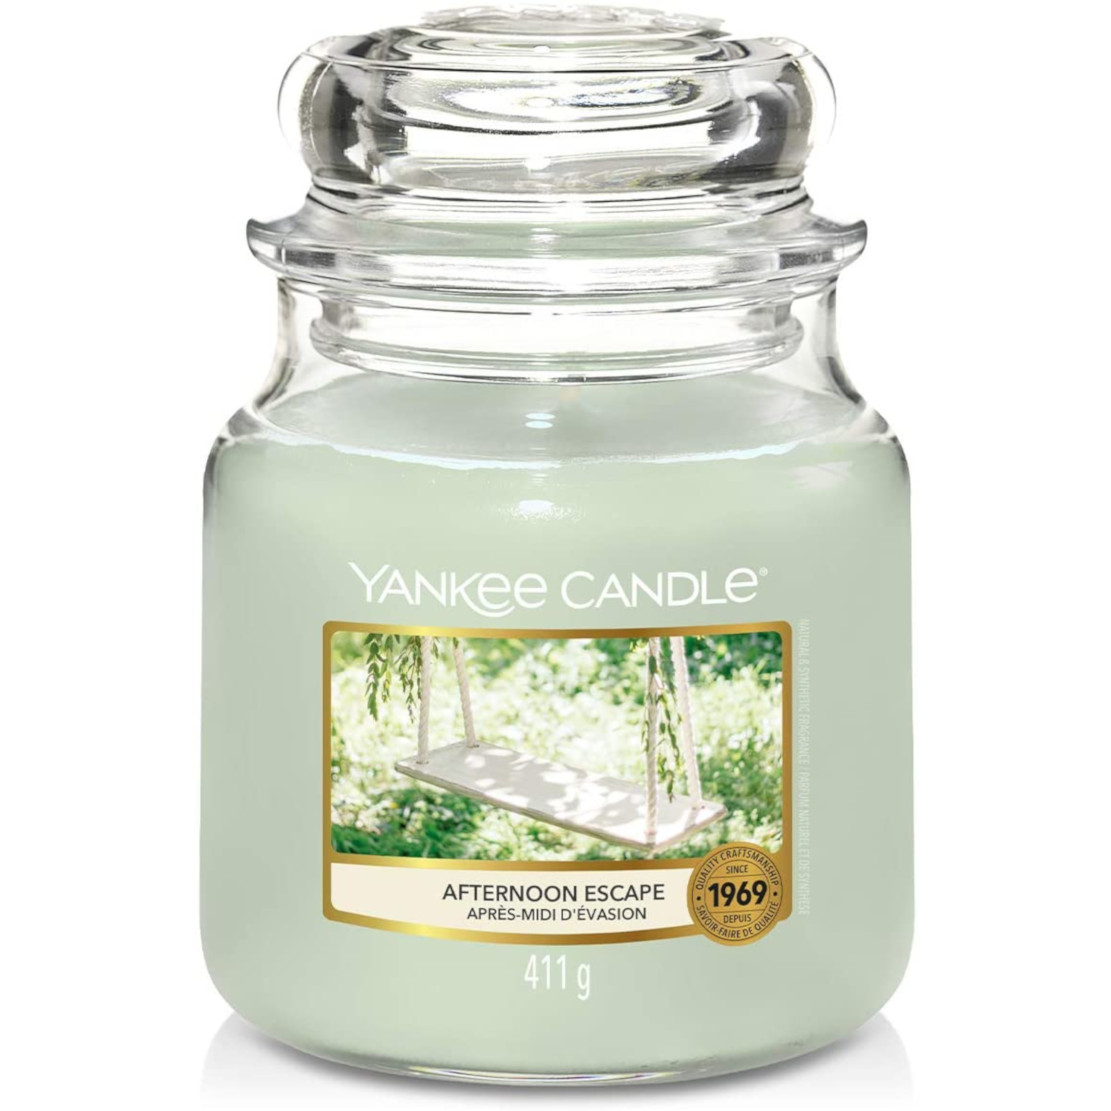 Yankee Candle Afternoon Escapes Medium Jar